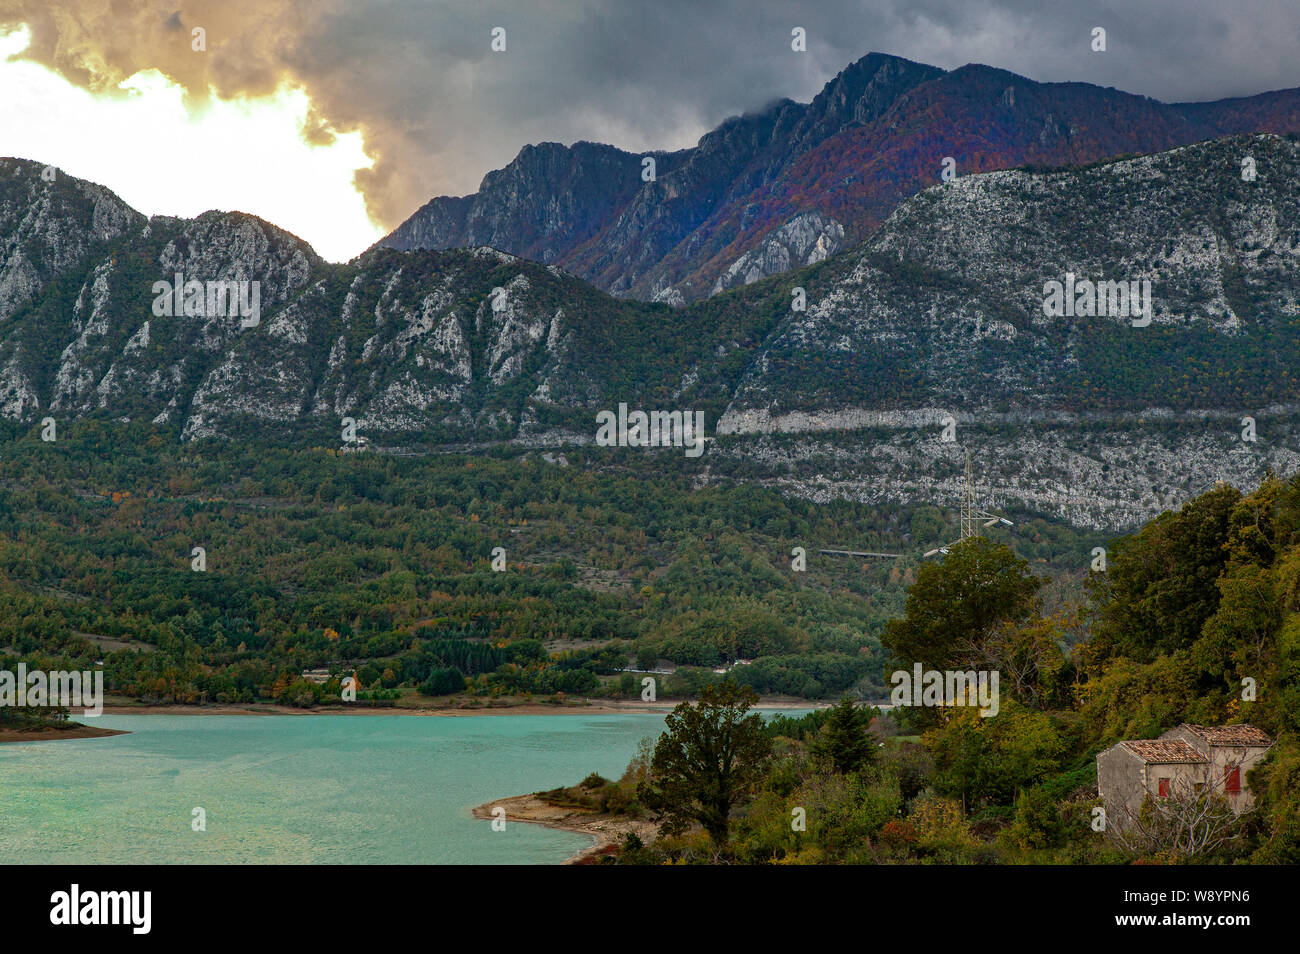 Mainarde mountain range with the artificial lake of Castel San Vincenzo Stock Photo